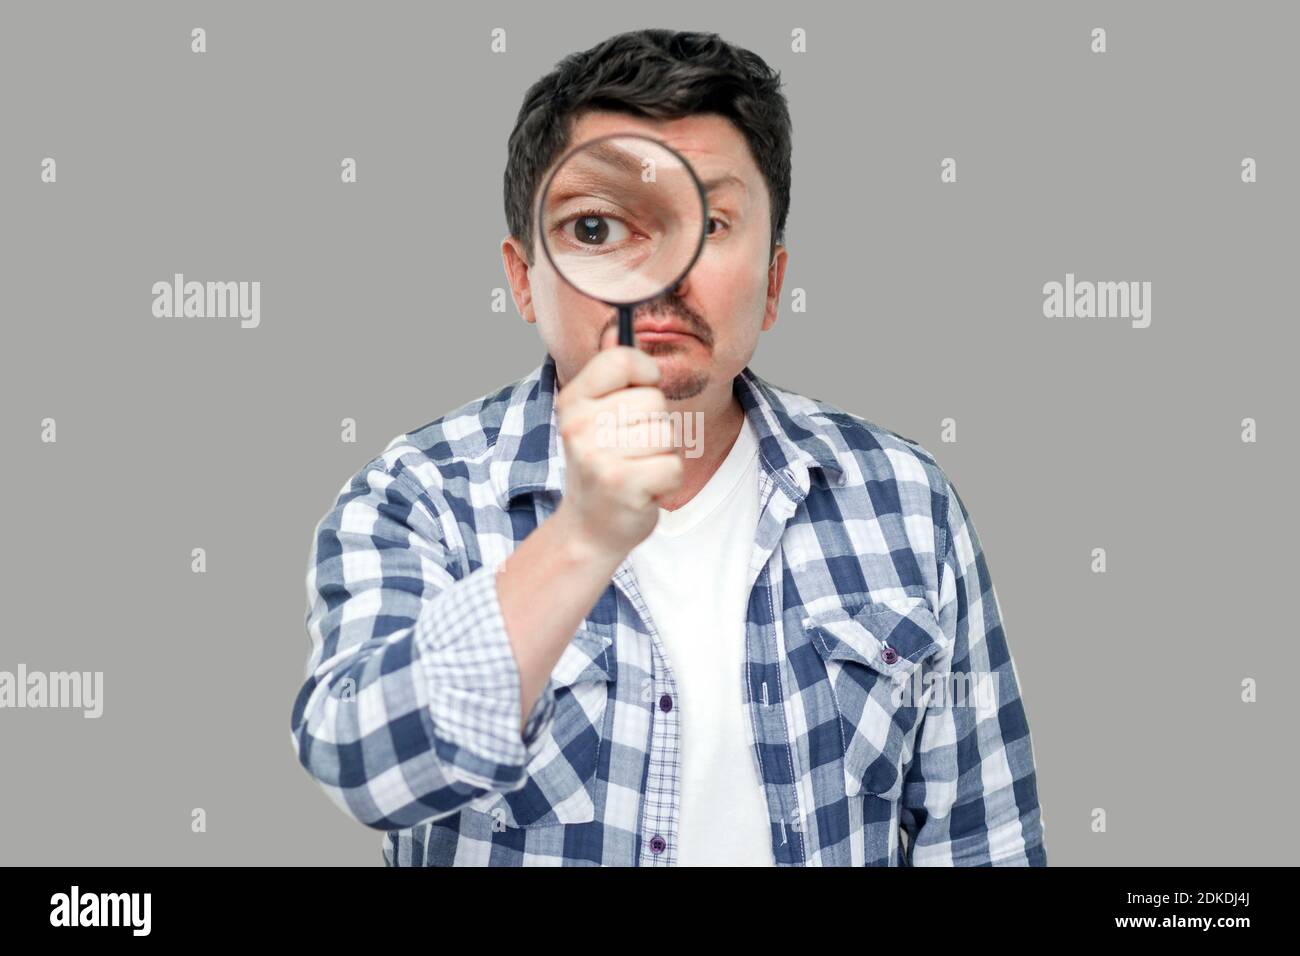 Portrait of serious middle aged man in casual checkered shirt standing, holding magnifying glass and looking at camera with big zoom eye. indoor studi Stock Photo